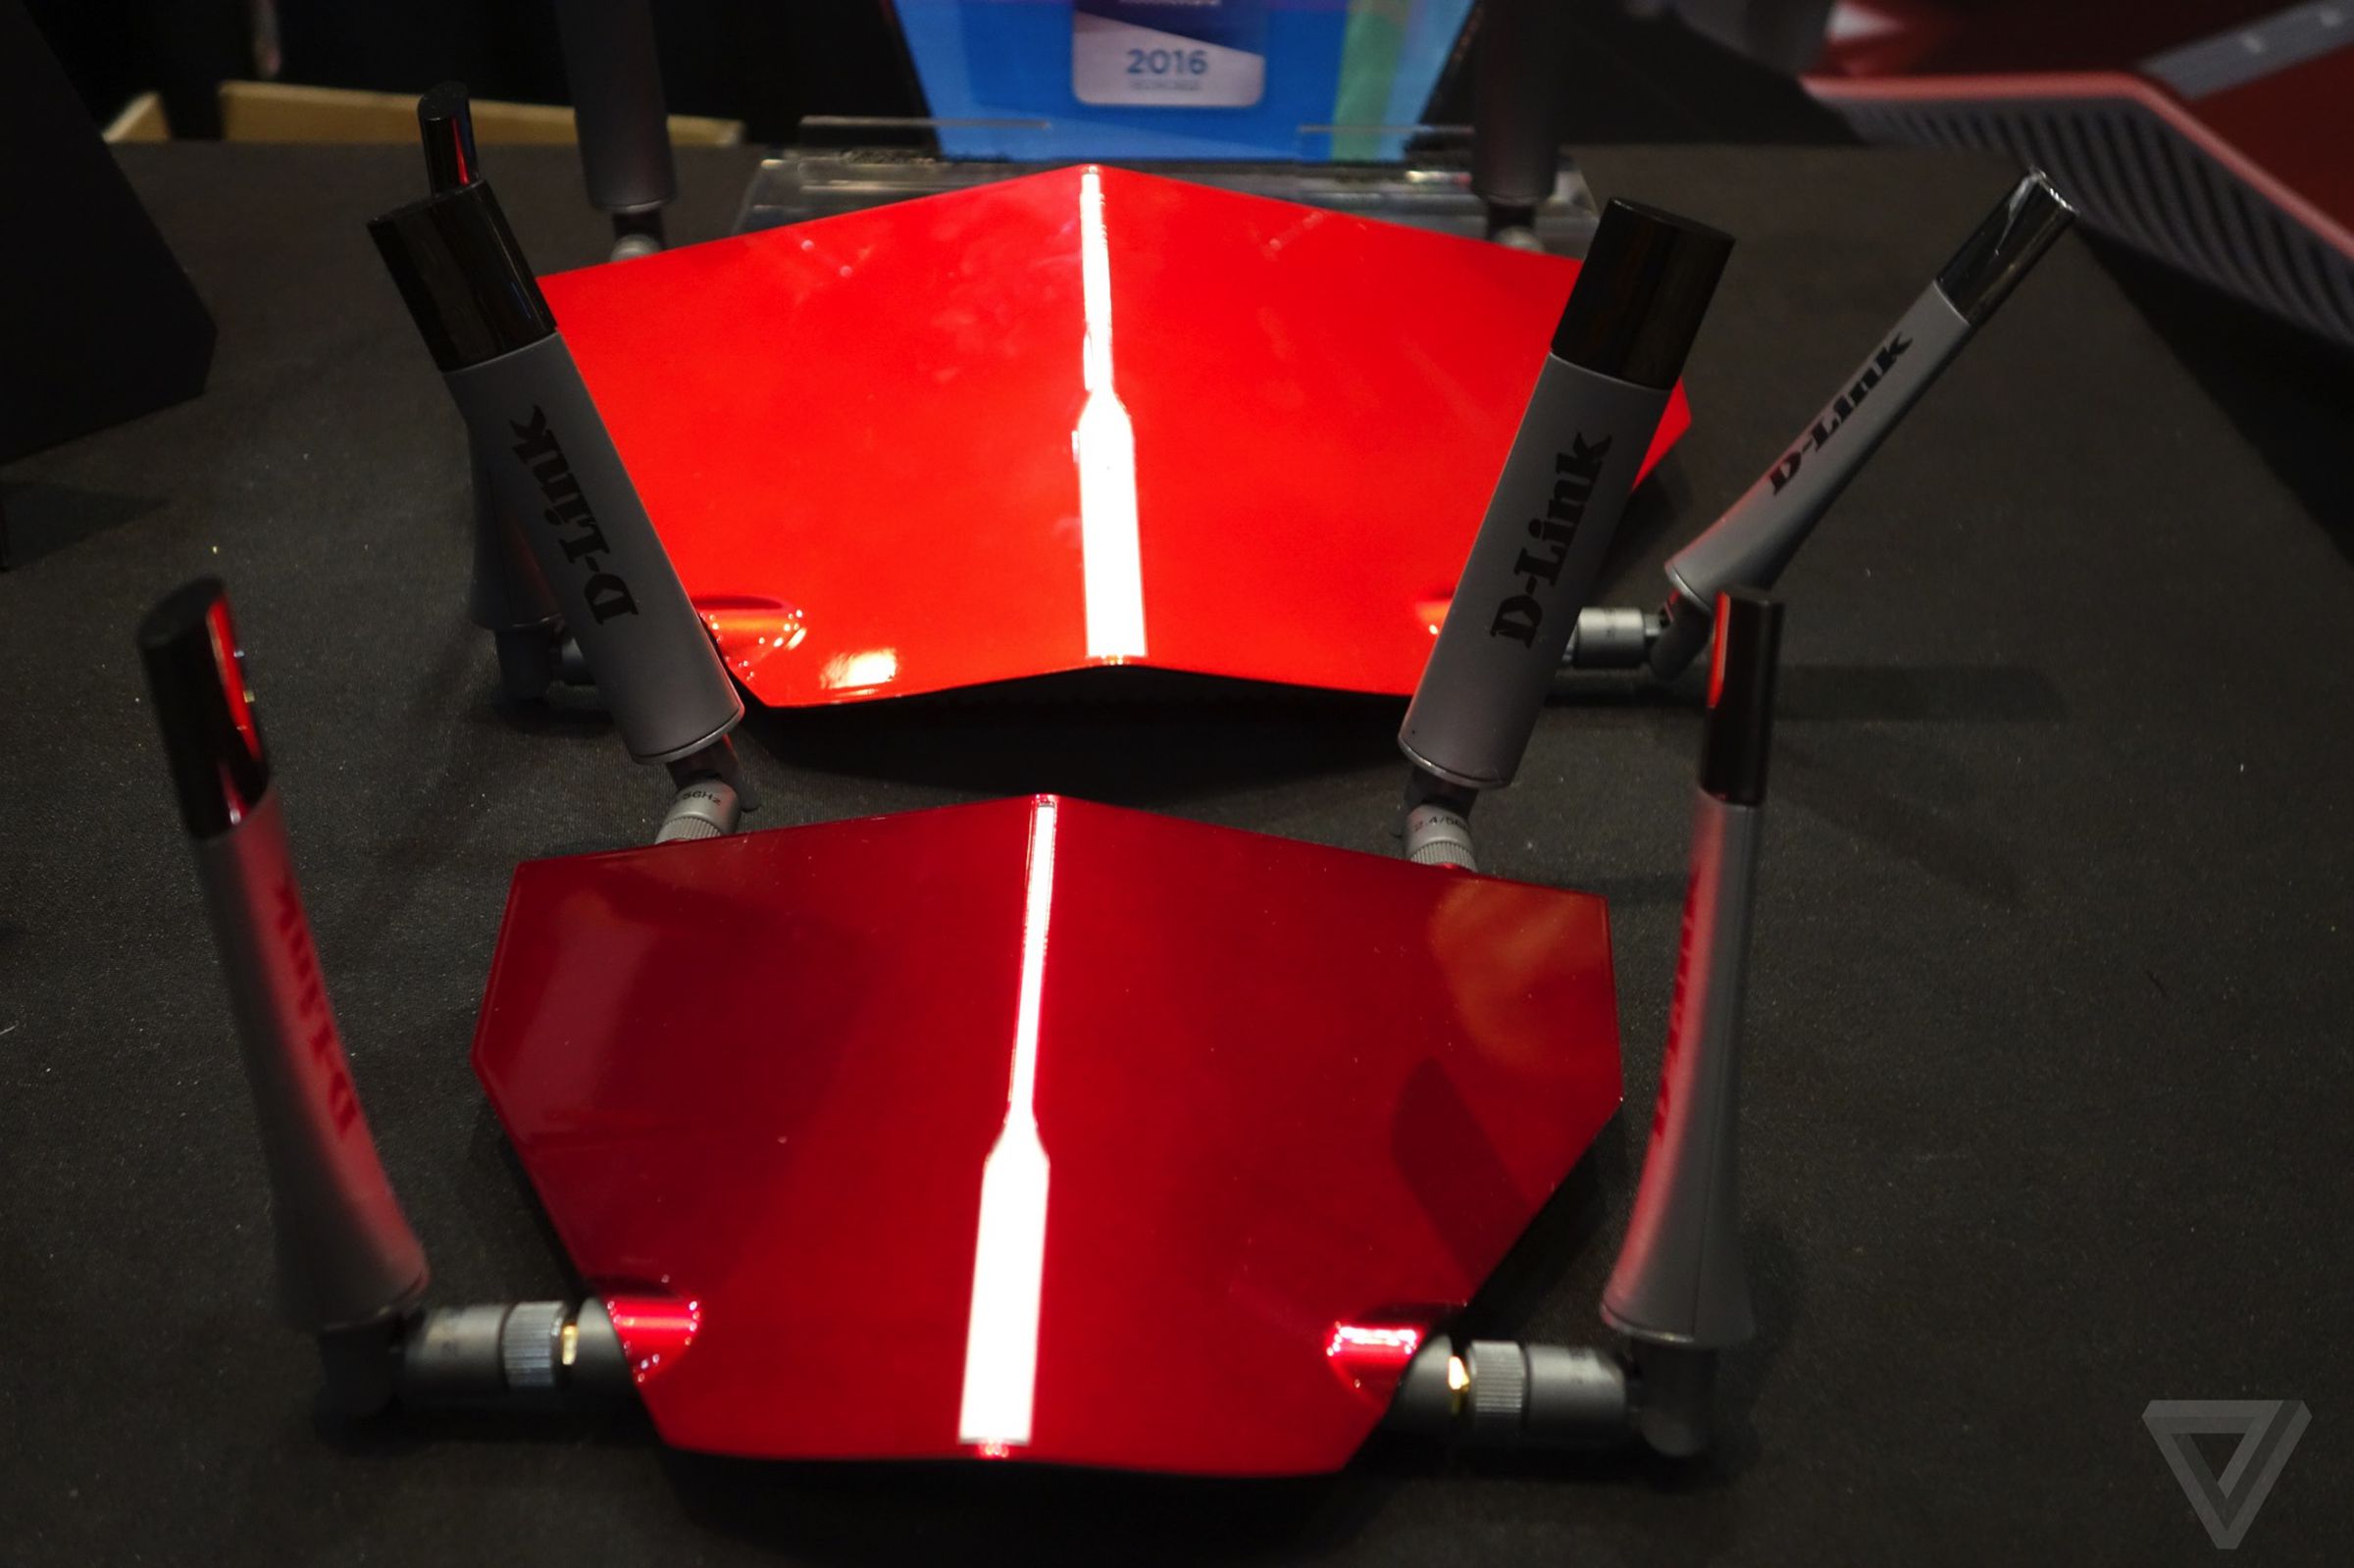 D-Link spider routers